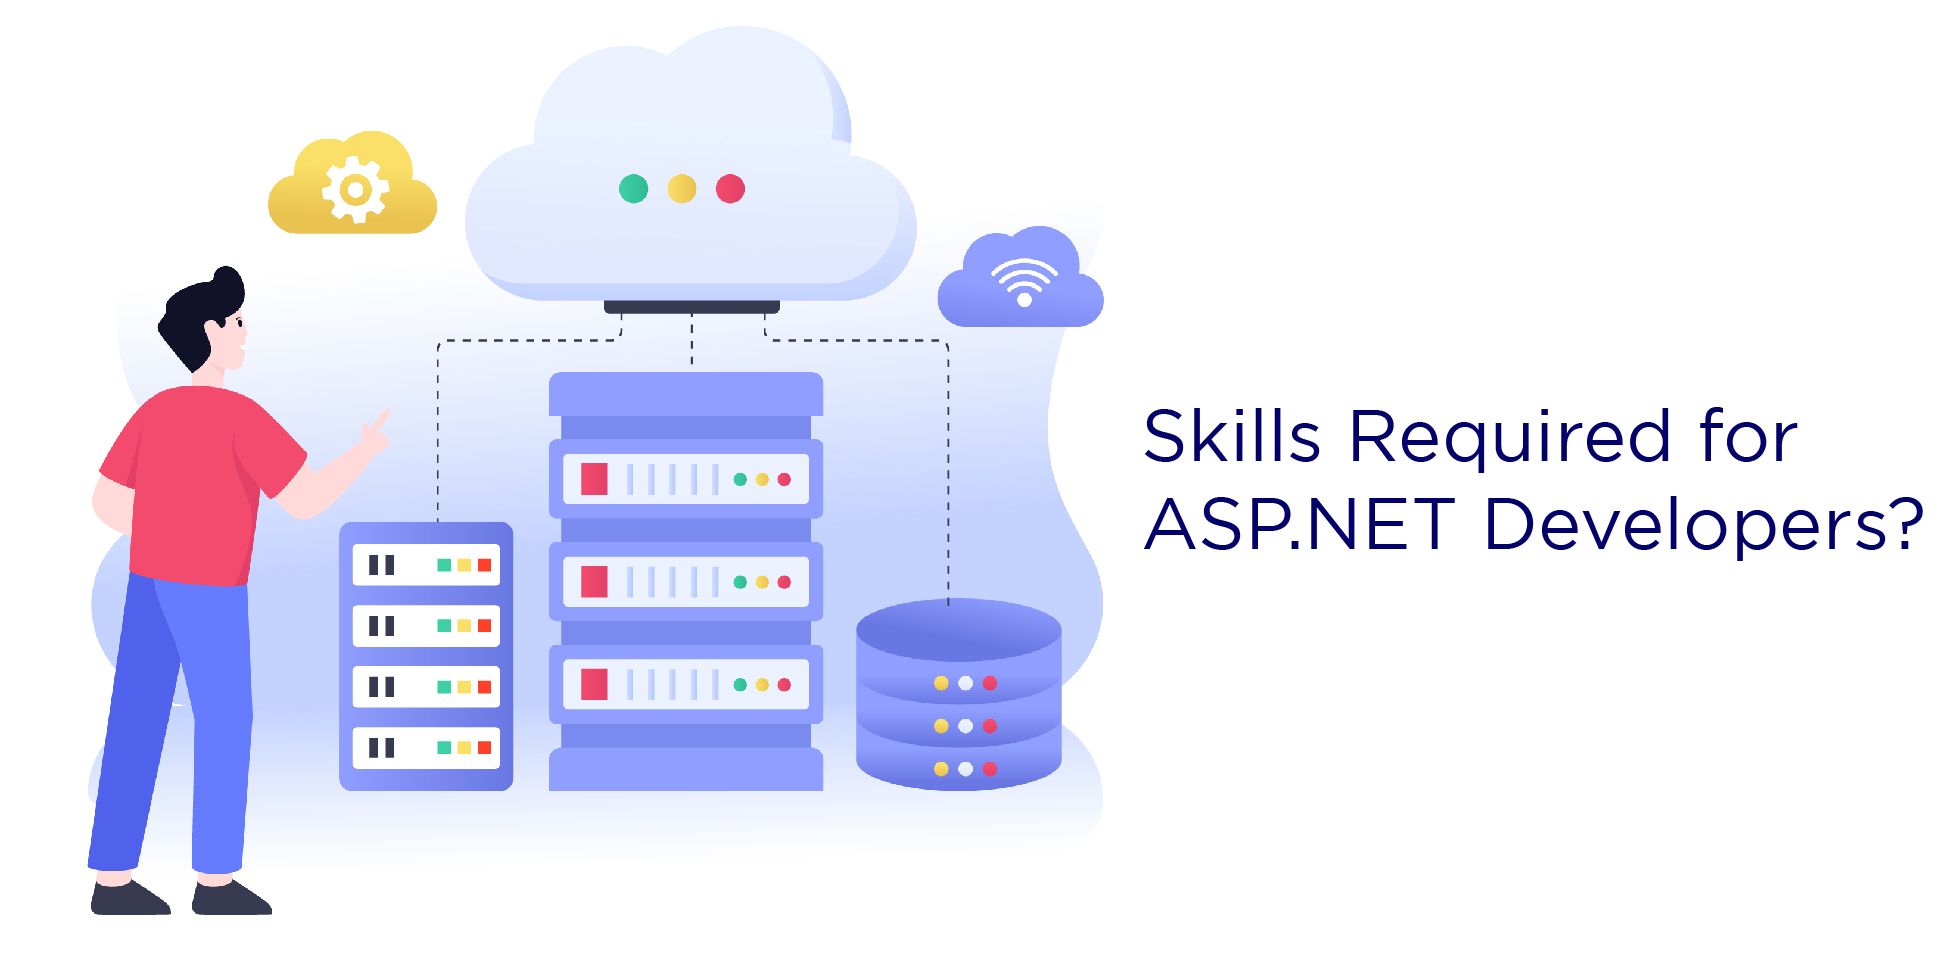 What skills do ASP.NET developers need to possess?